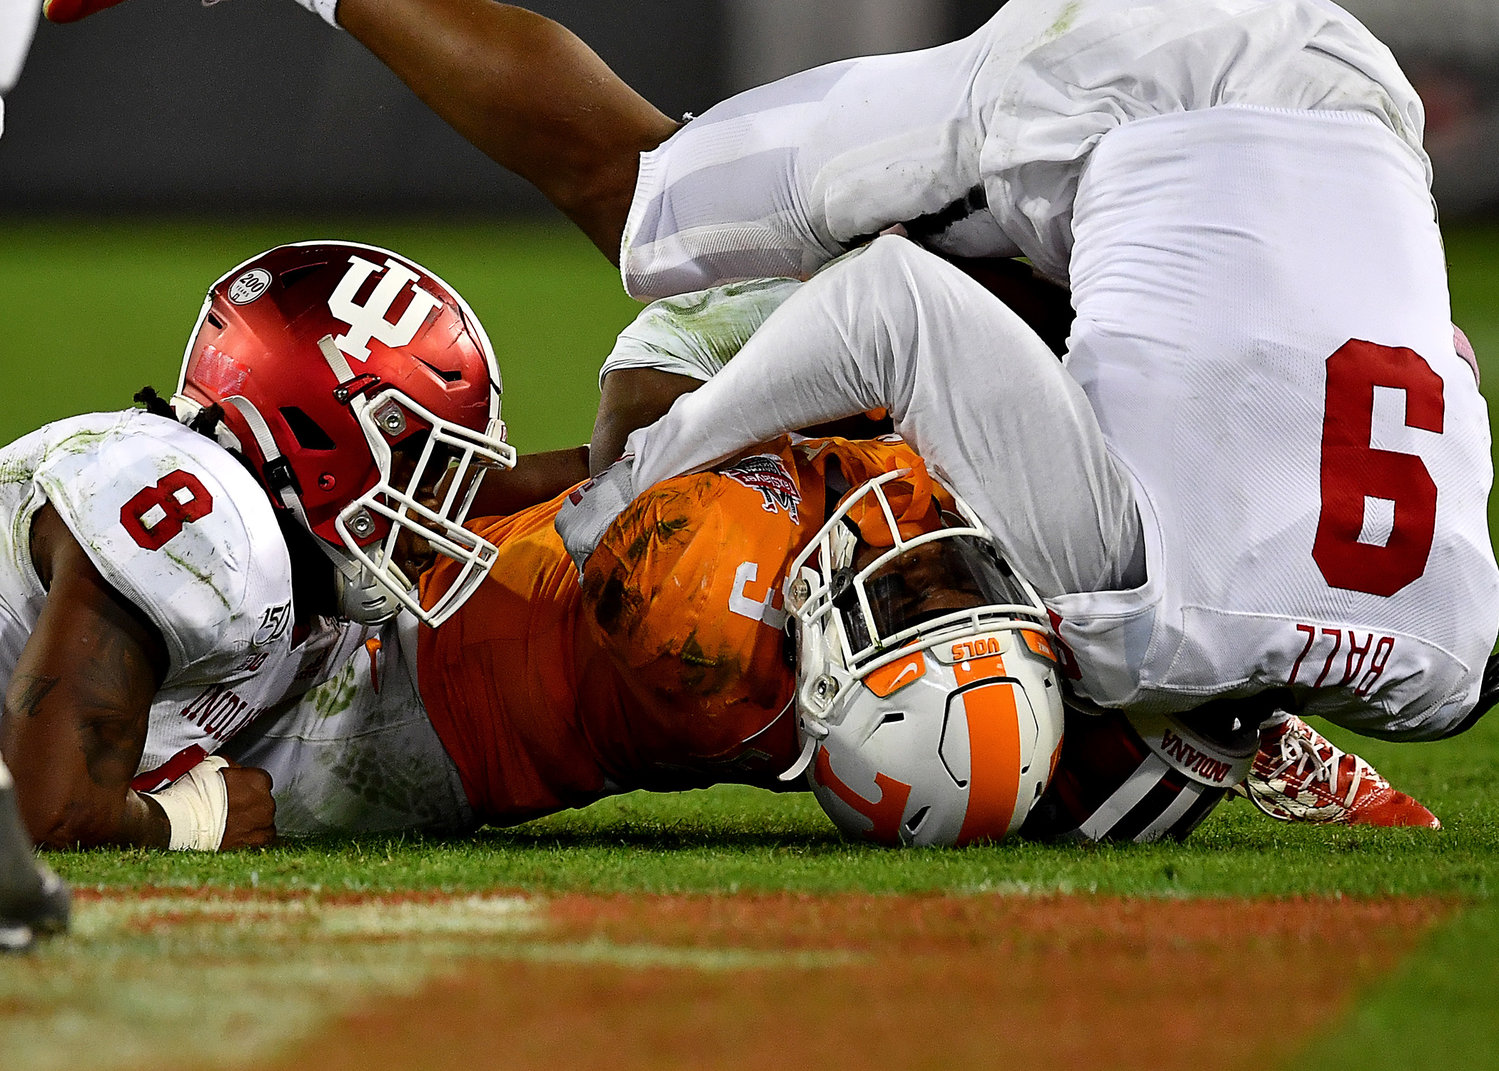 Indiana Hoosiers defensive back Marcelino Ball (9) tackles Tennessee Volunteers running back Eric Gray (3) in the second half of the Gator Bowl NCAA football game Thursday, January 2, 2020, at TIAA Bank Field in Jacksonville, Fla.